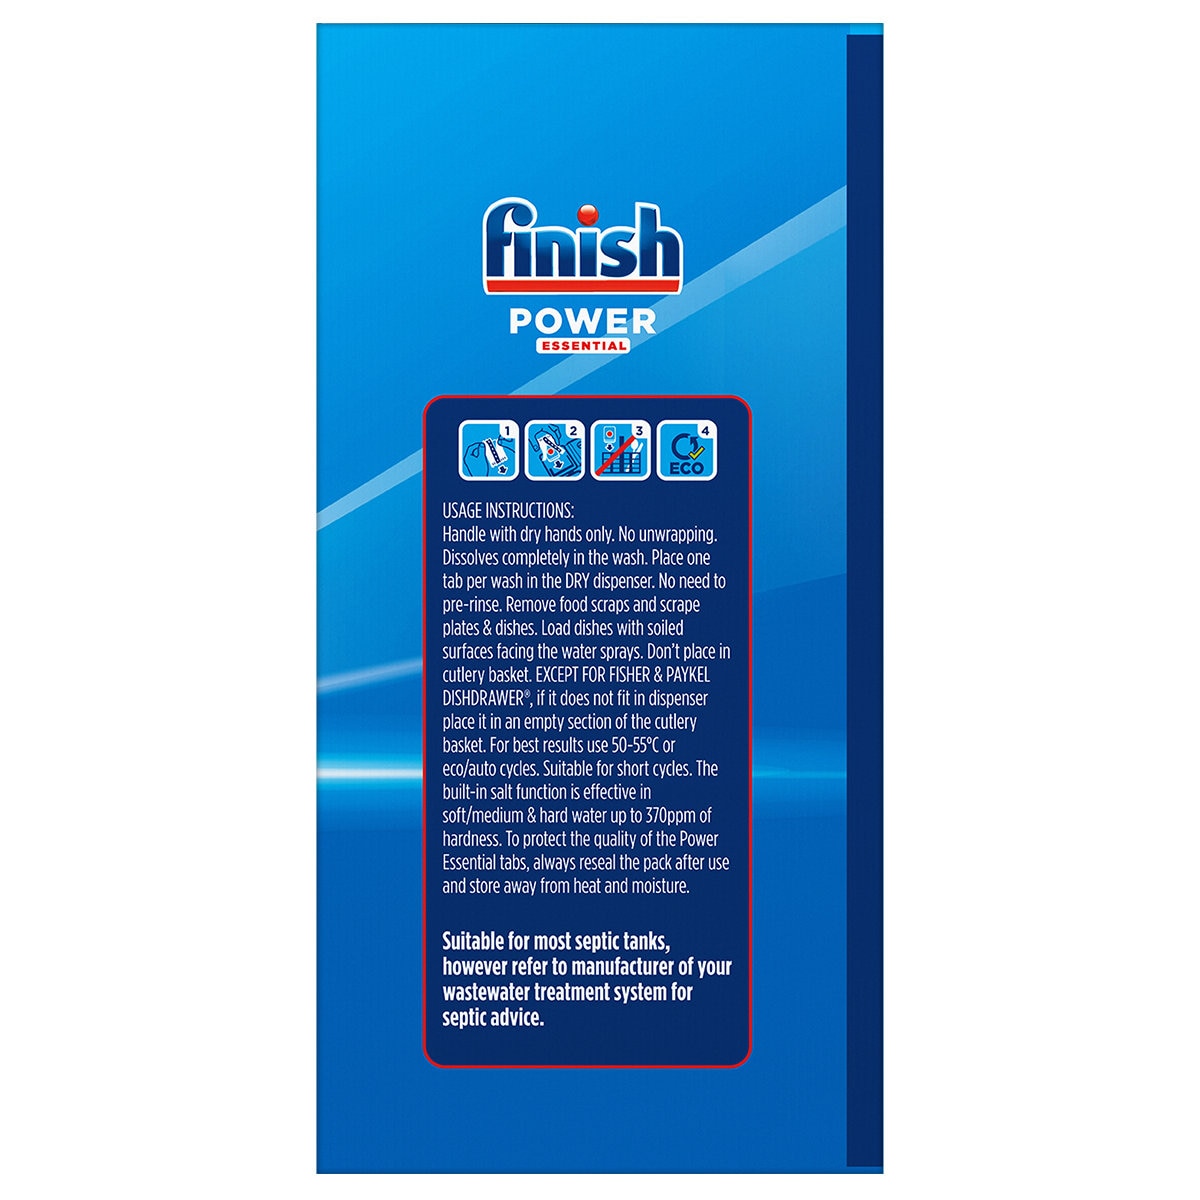 Finish Power Essential 140 Count